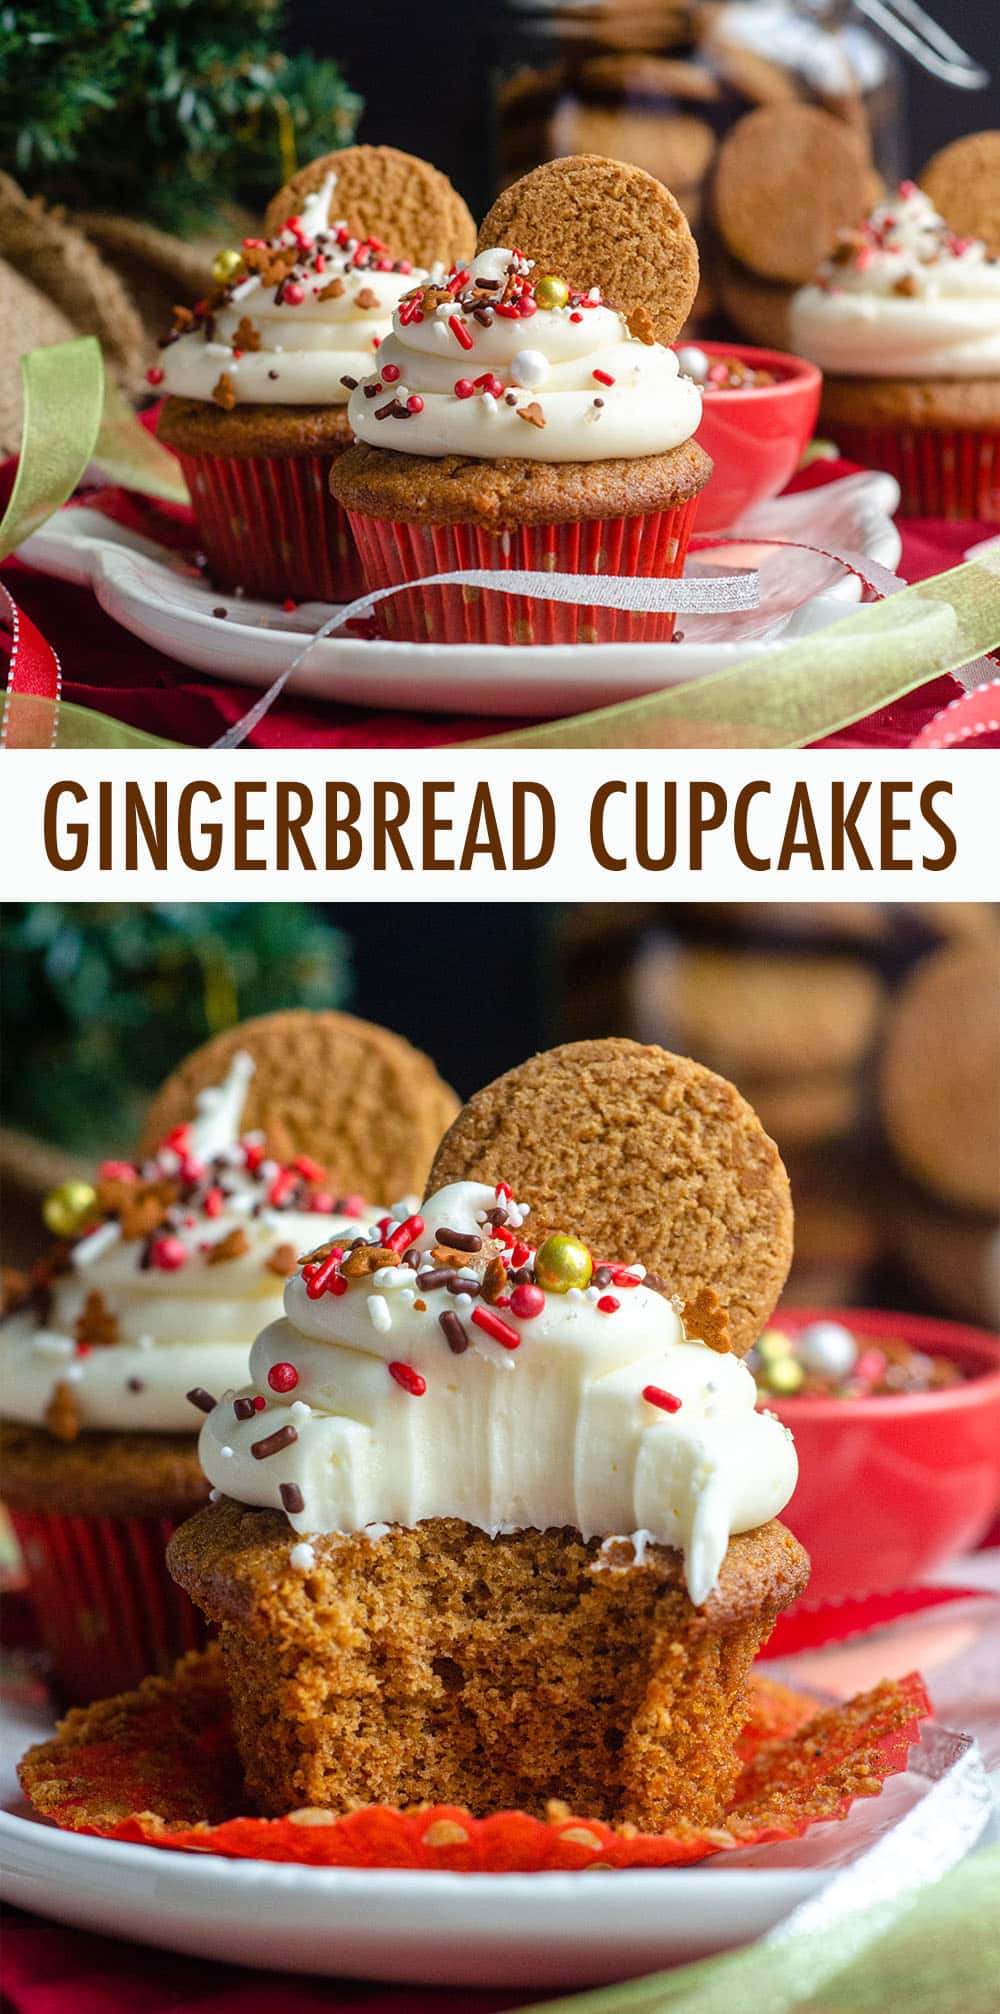 Sweet and spicy cupcakes full of all of your favorite gingerbread flavors and topped with a tangy cream cheese frosting. via @frshaprilflours